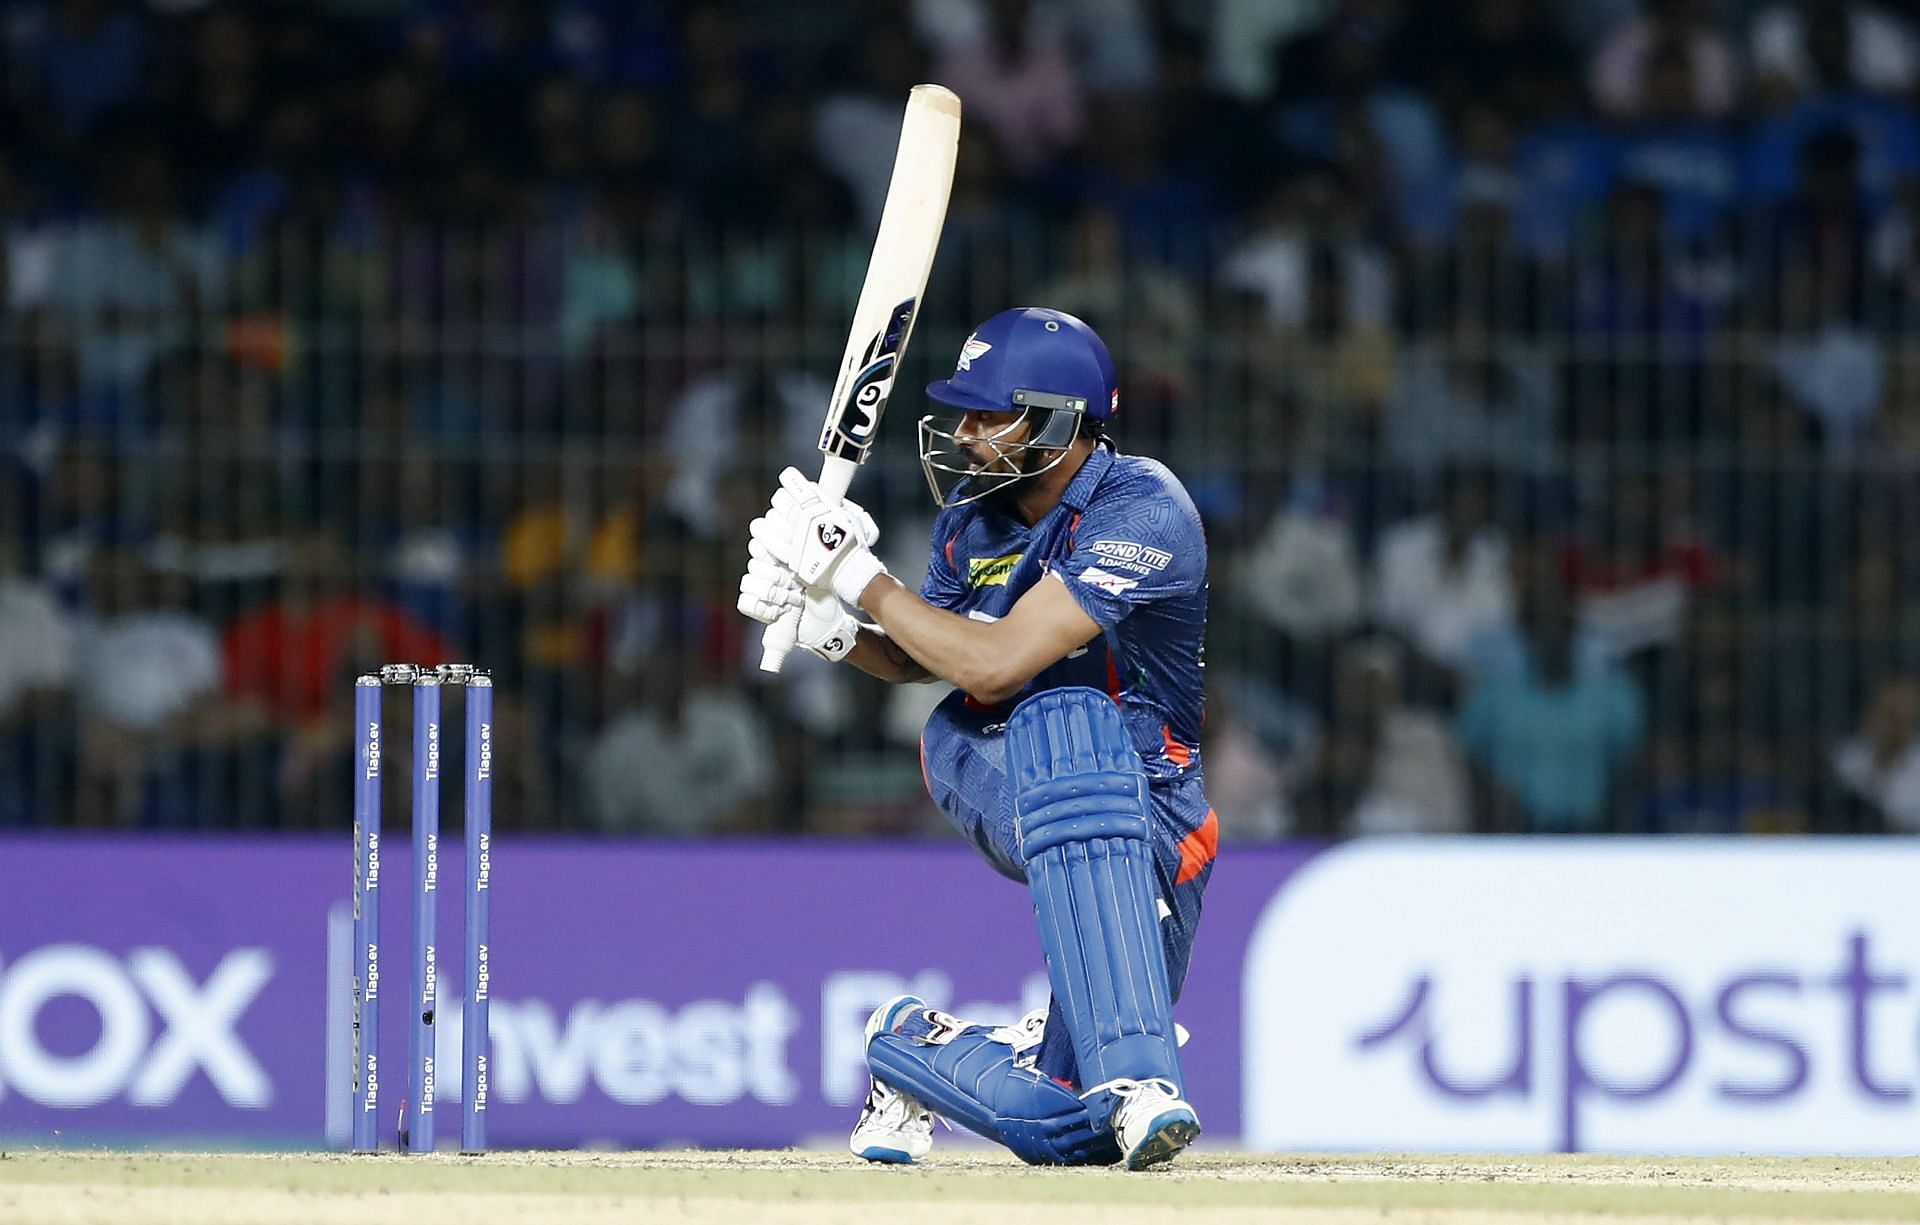 Krunal Pandya can be the game-changer for Lucknow Super Giants (Image: Getty)